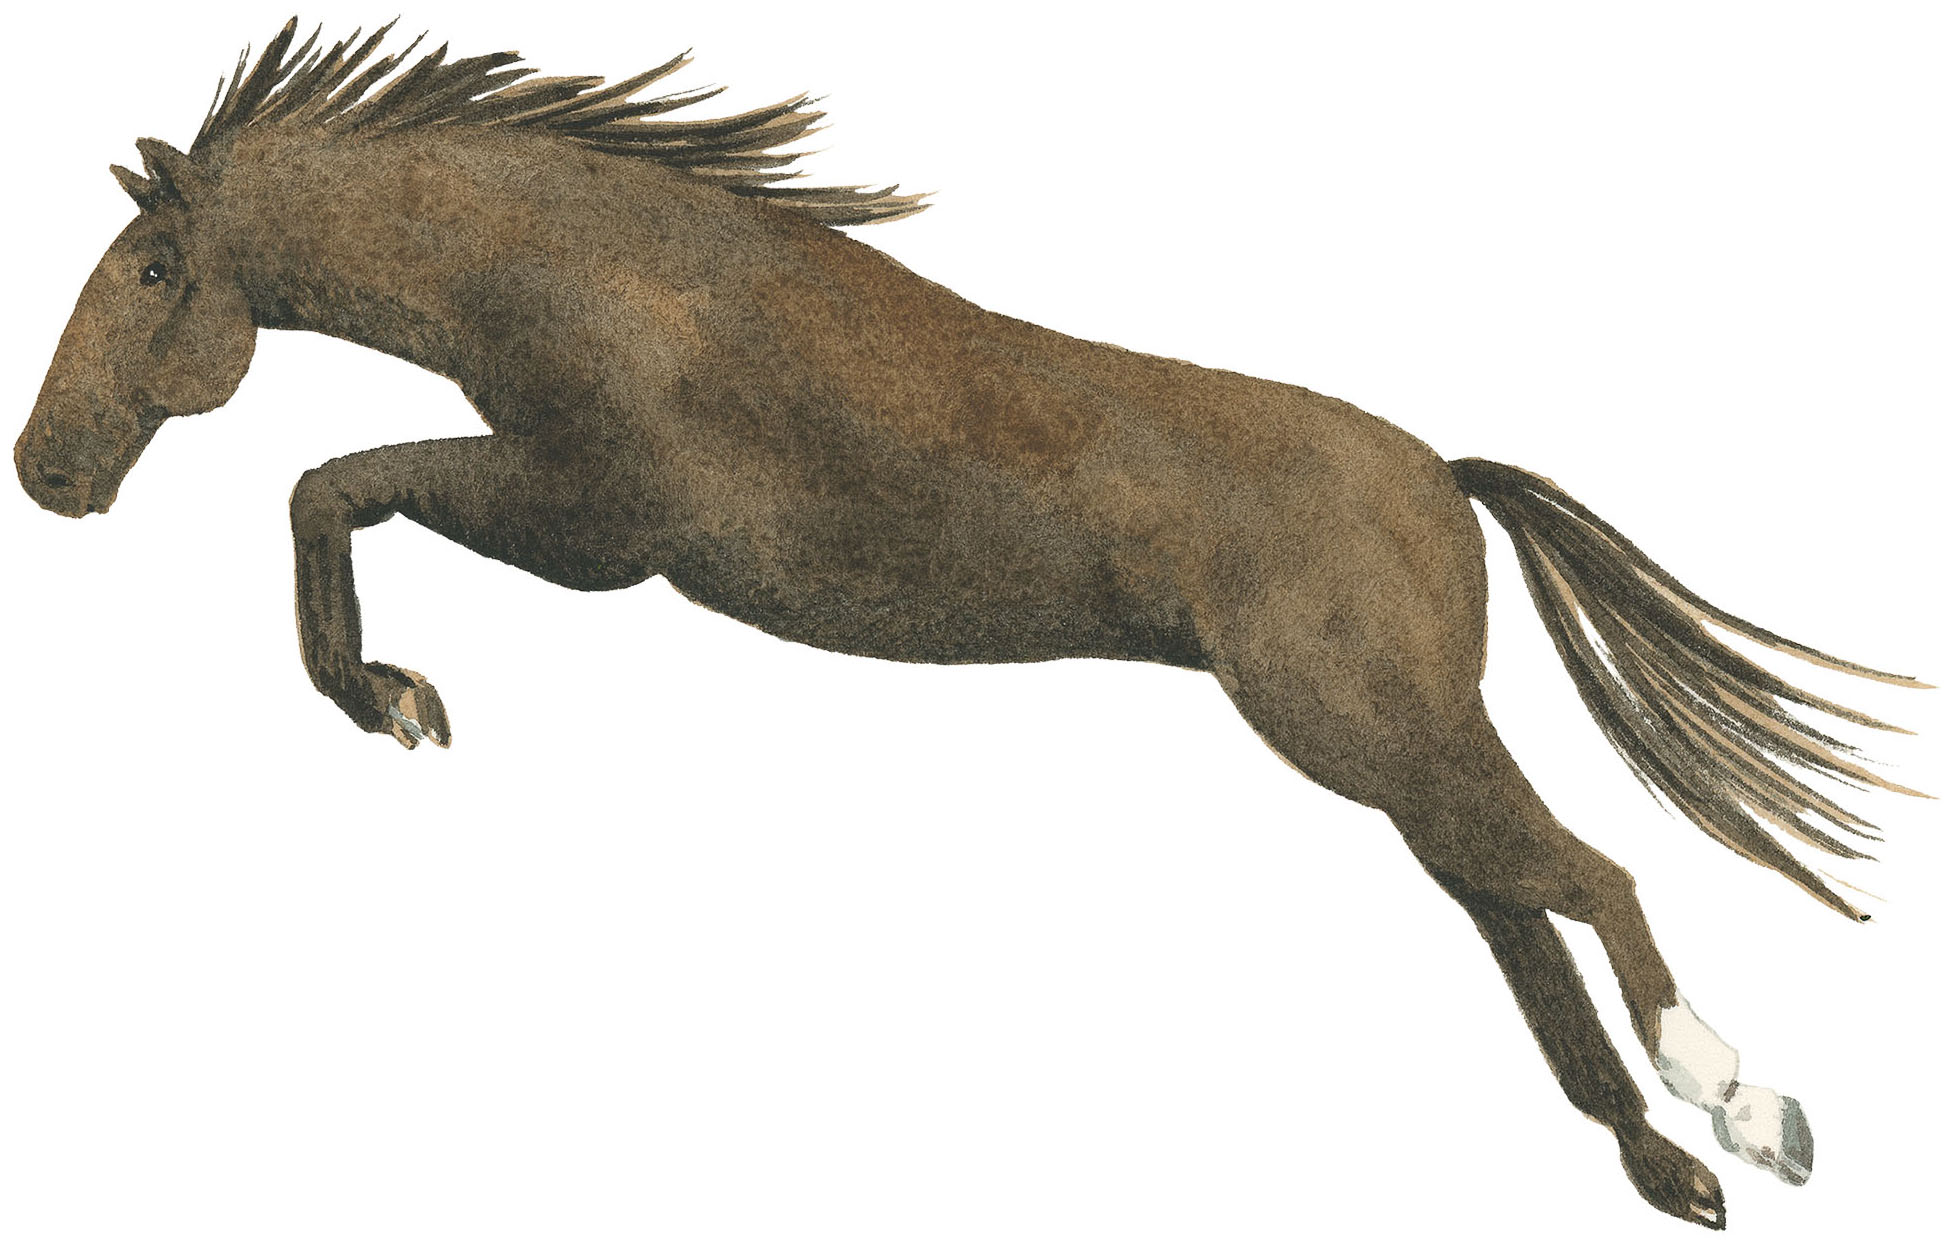 A brown horse leaping through the air illustration